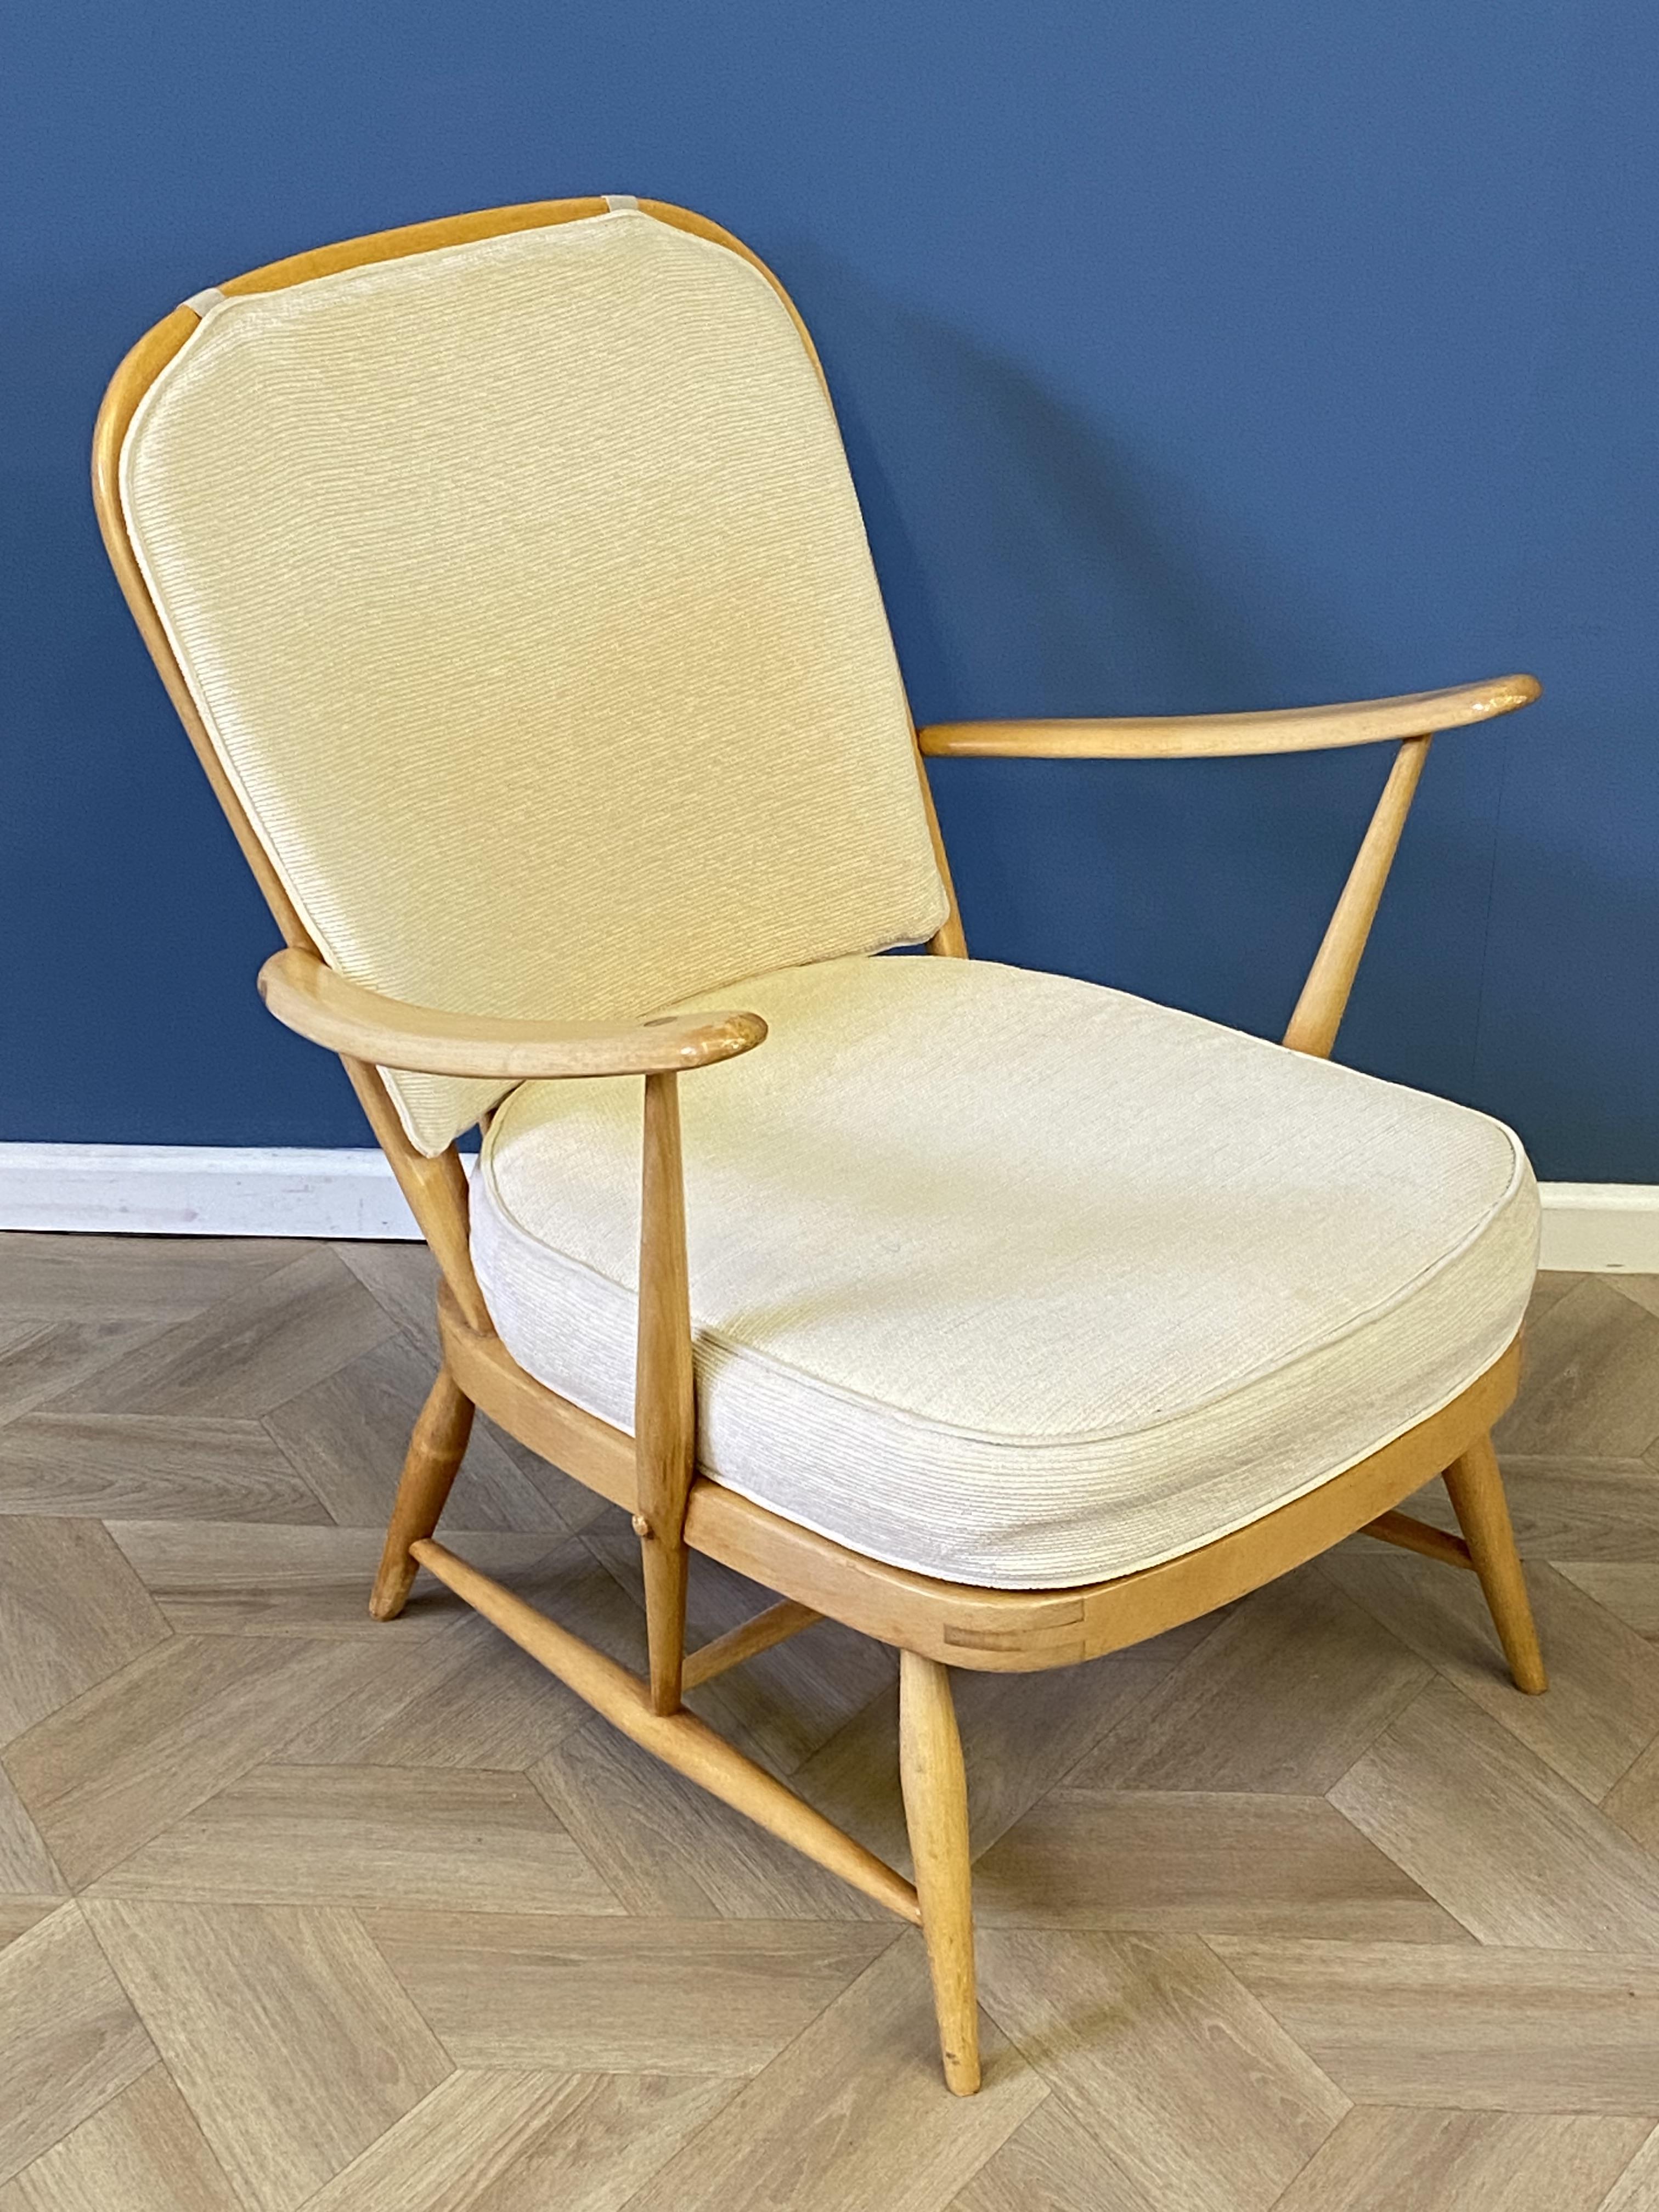 Ercol style open armchair - Image 7 of 7